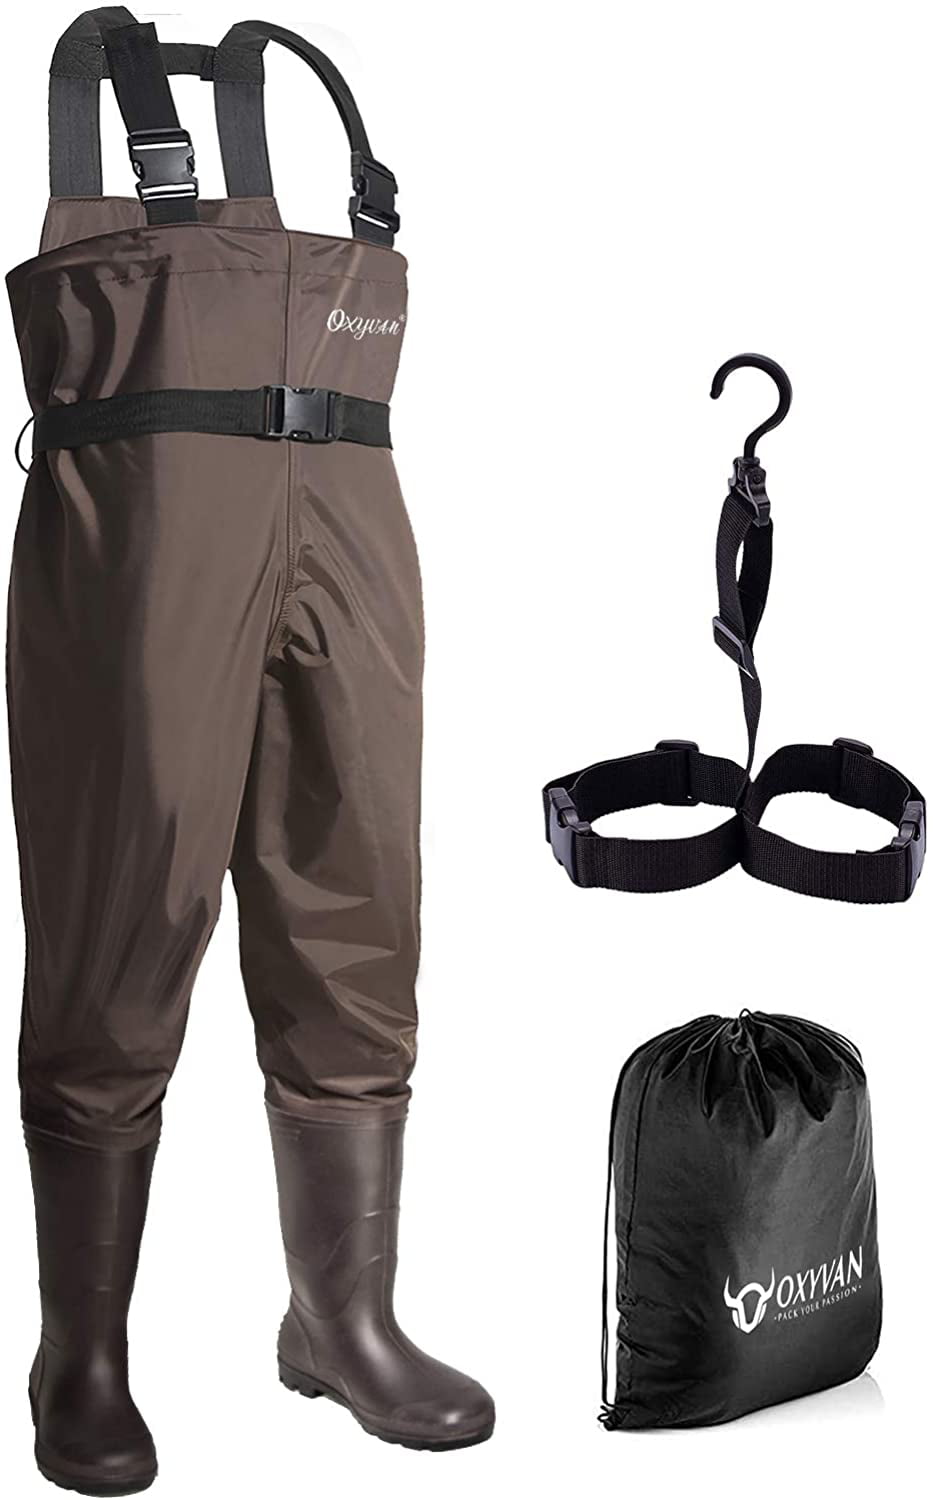 8 Fans Fishing Waders for Men with Boots,Chest bootfoot Waders with Wading Belt Waterproof Insulated Nylon and PVC Cleated Wading Boots Unisex 